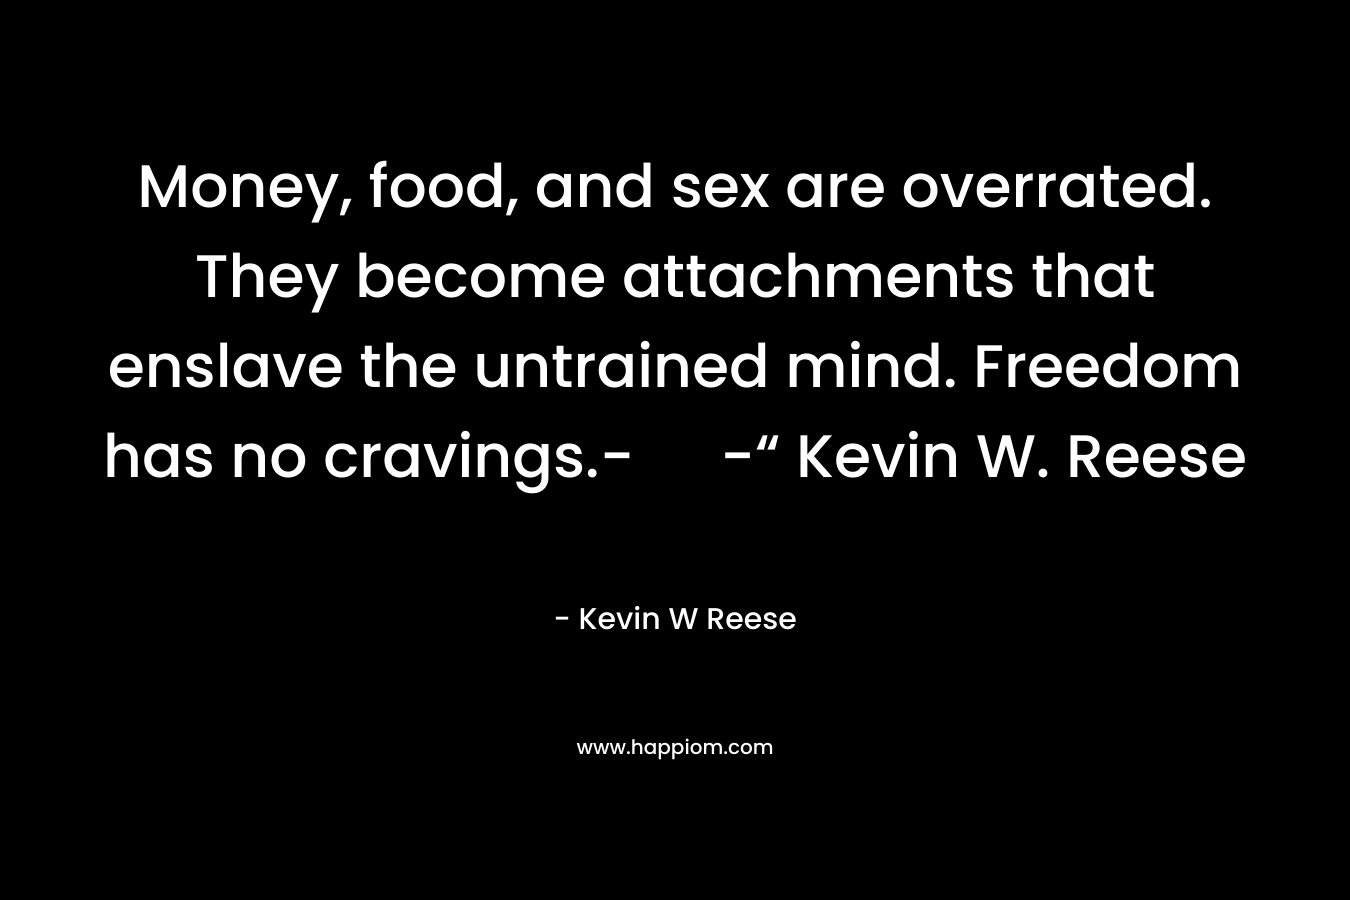 Money, food, and sex are overrated. They become attachments that enslave the untrained mind. Freedom has no cravings.- -“ Kevin W. Reese